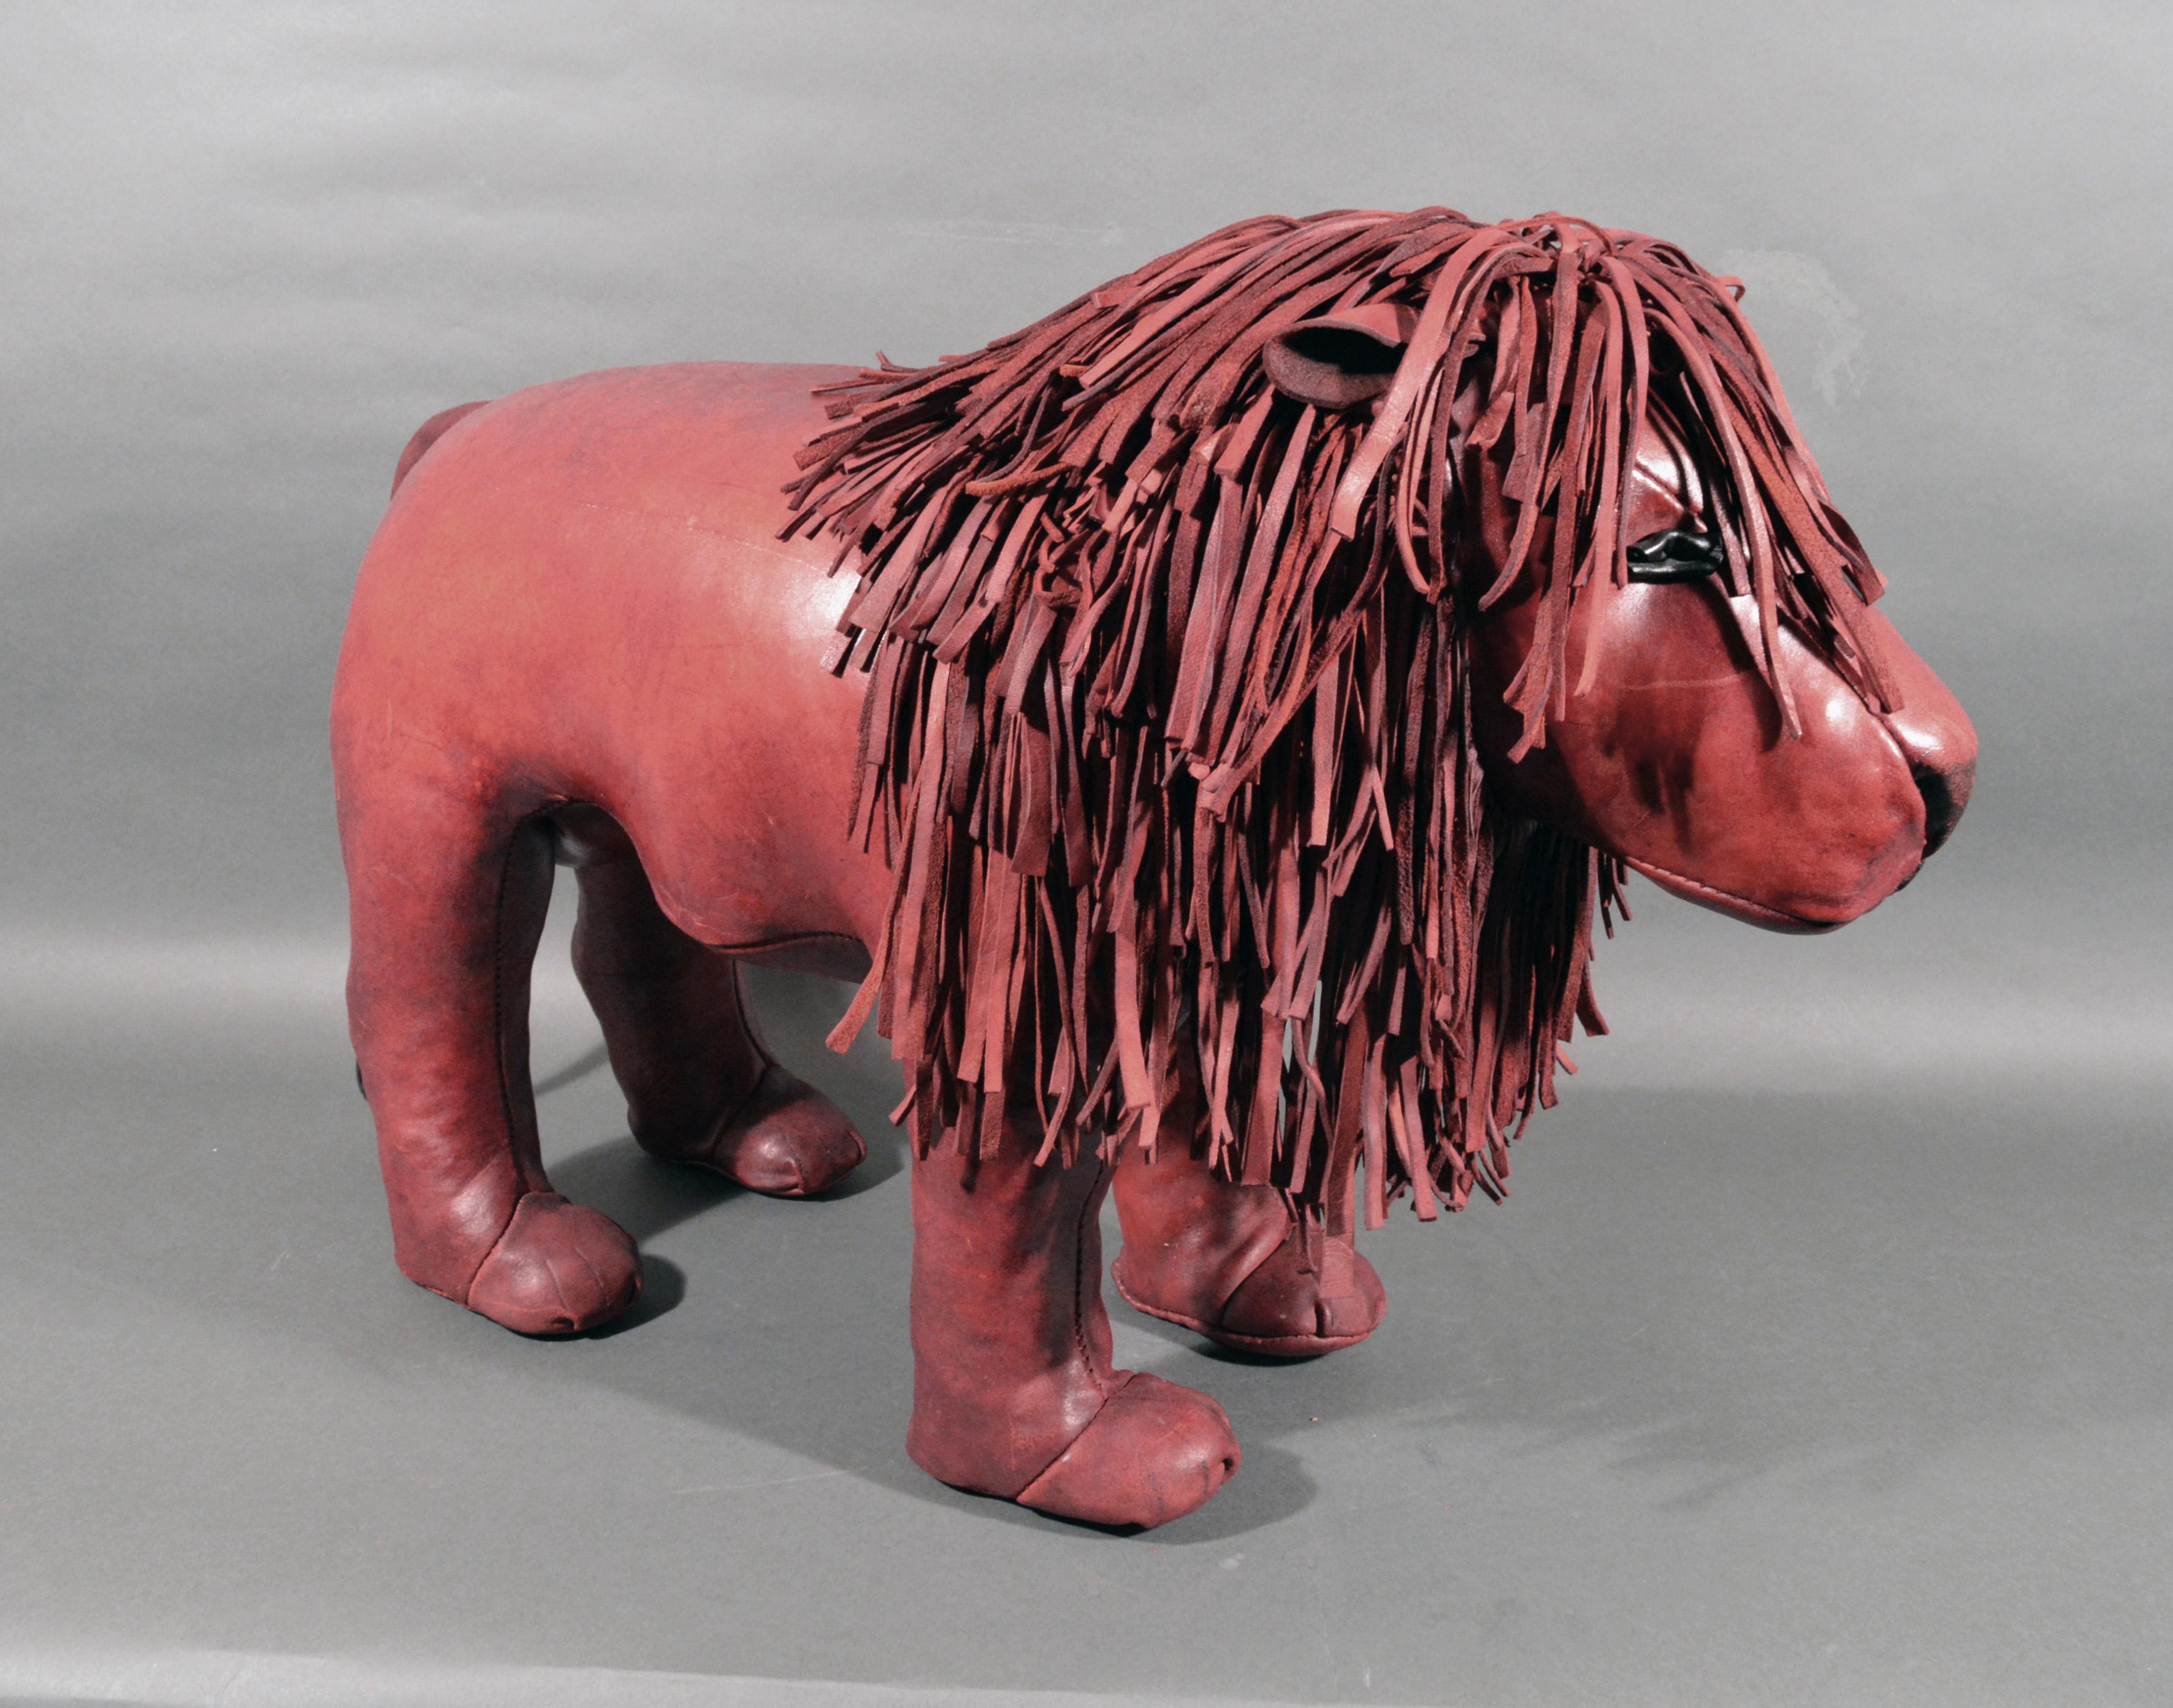 English vintage large leather golden lion foot stool,
Dimitri Omersa, England,
1974-1980s.

Dimensions: 20 inches high x 29-1/2 inches wide

From the Omersa website:

The golden lion was first introduced in the 1960s. In those days it had